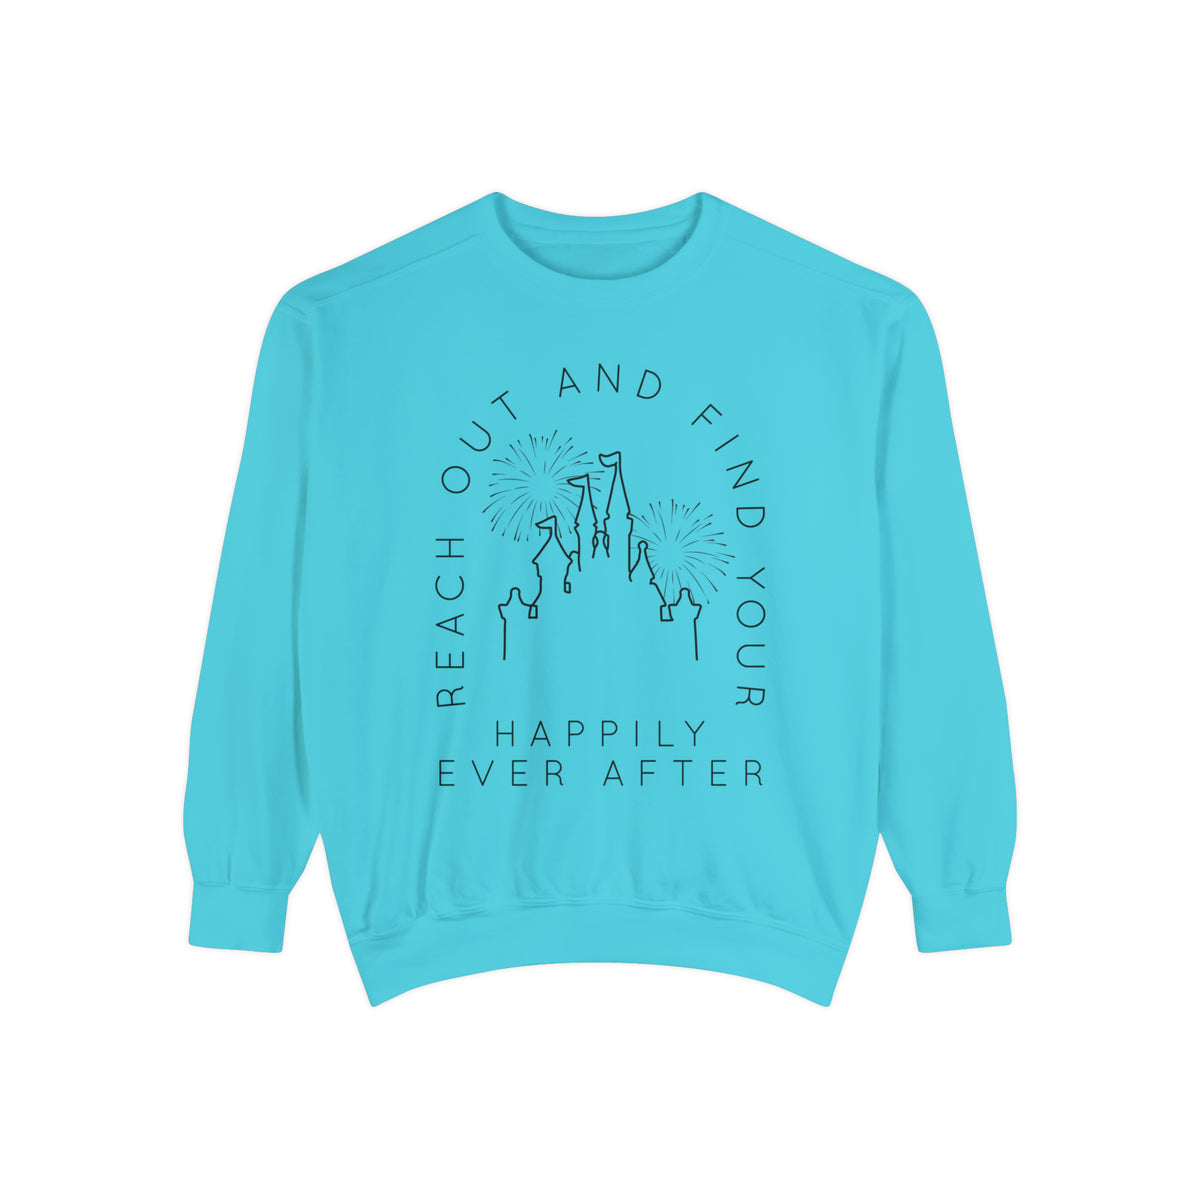 Reach Out And Find Your Happily Ever After Comfort Colors Unisex Garment-Dyed Sweatshirt